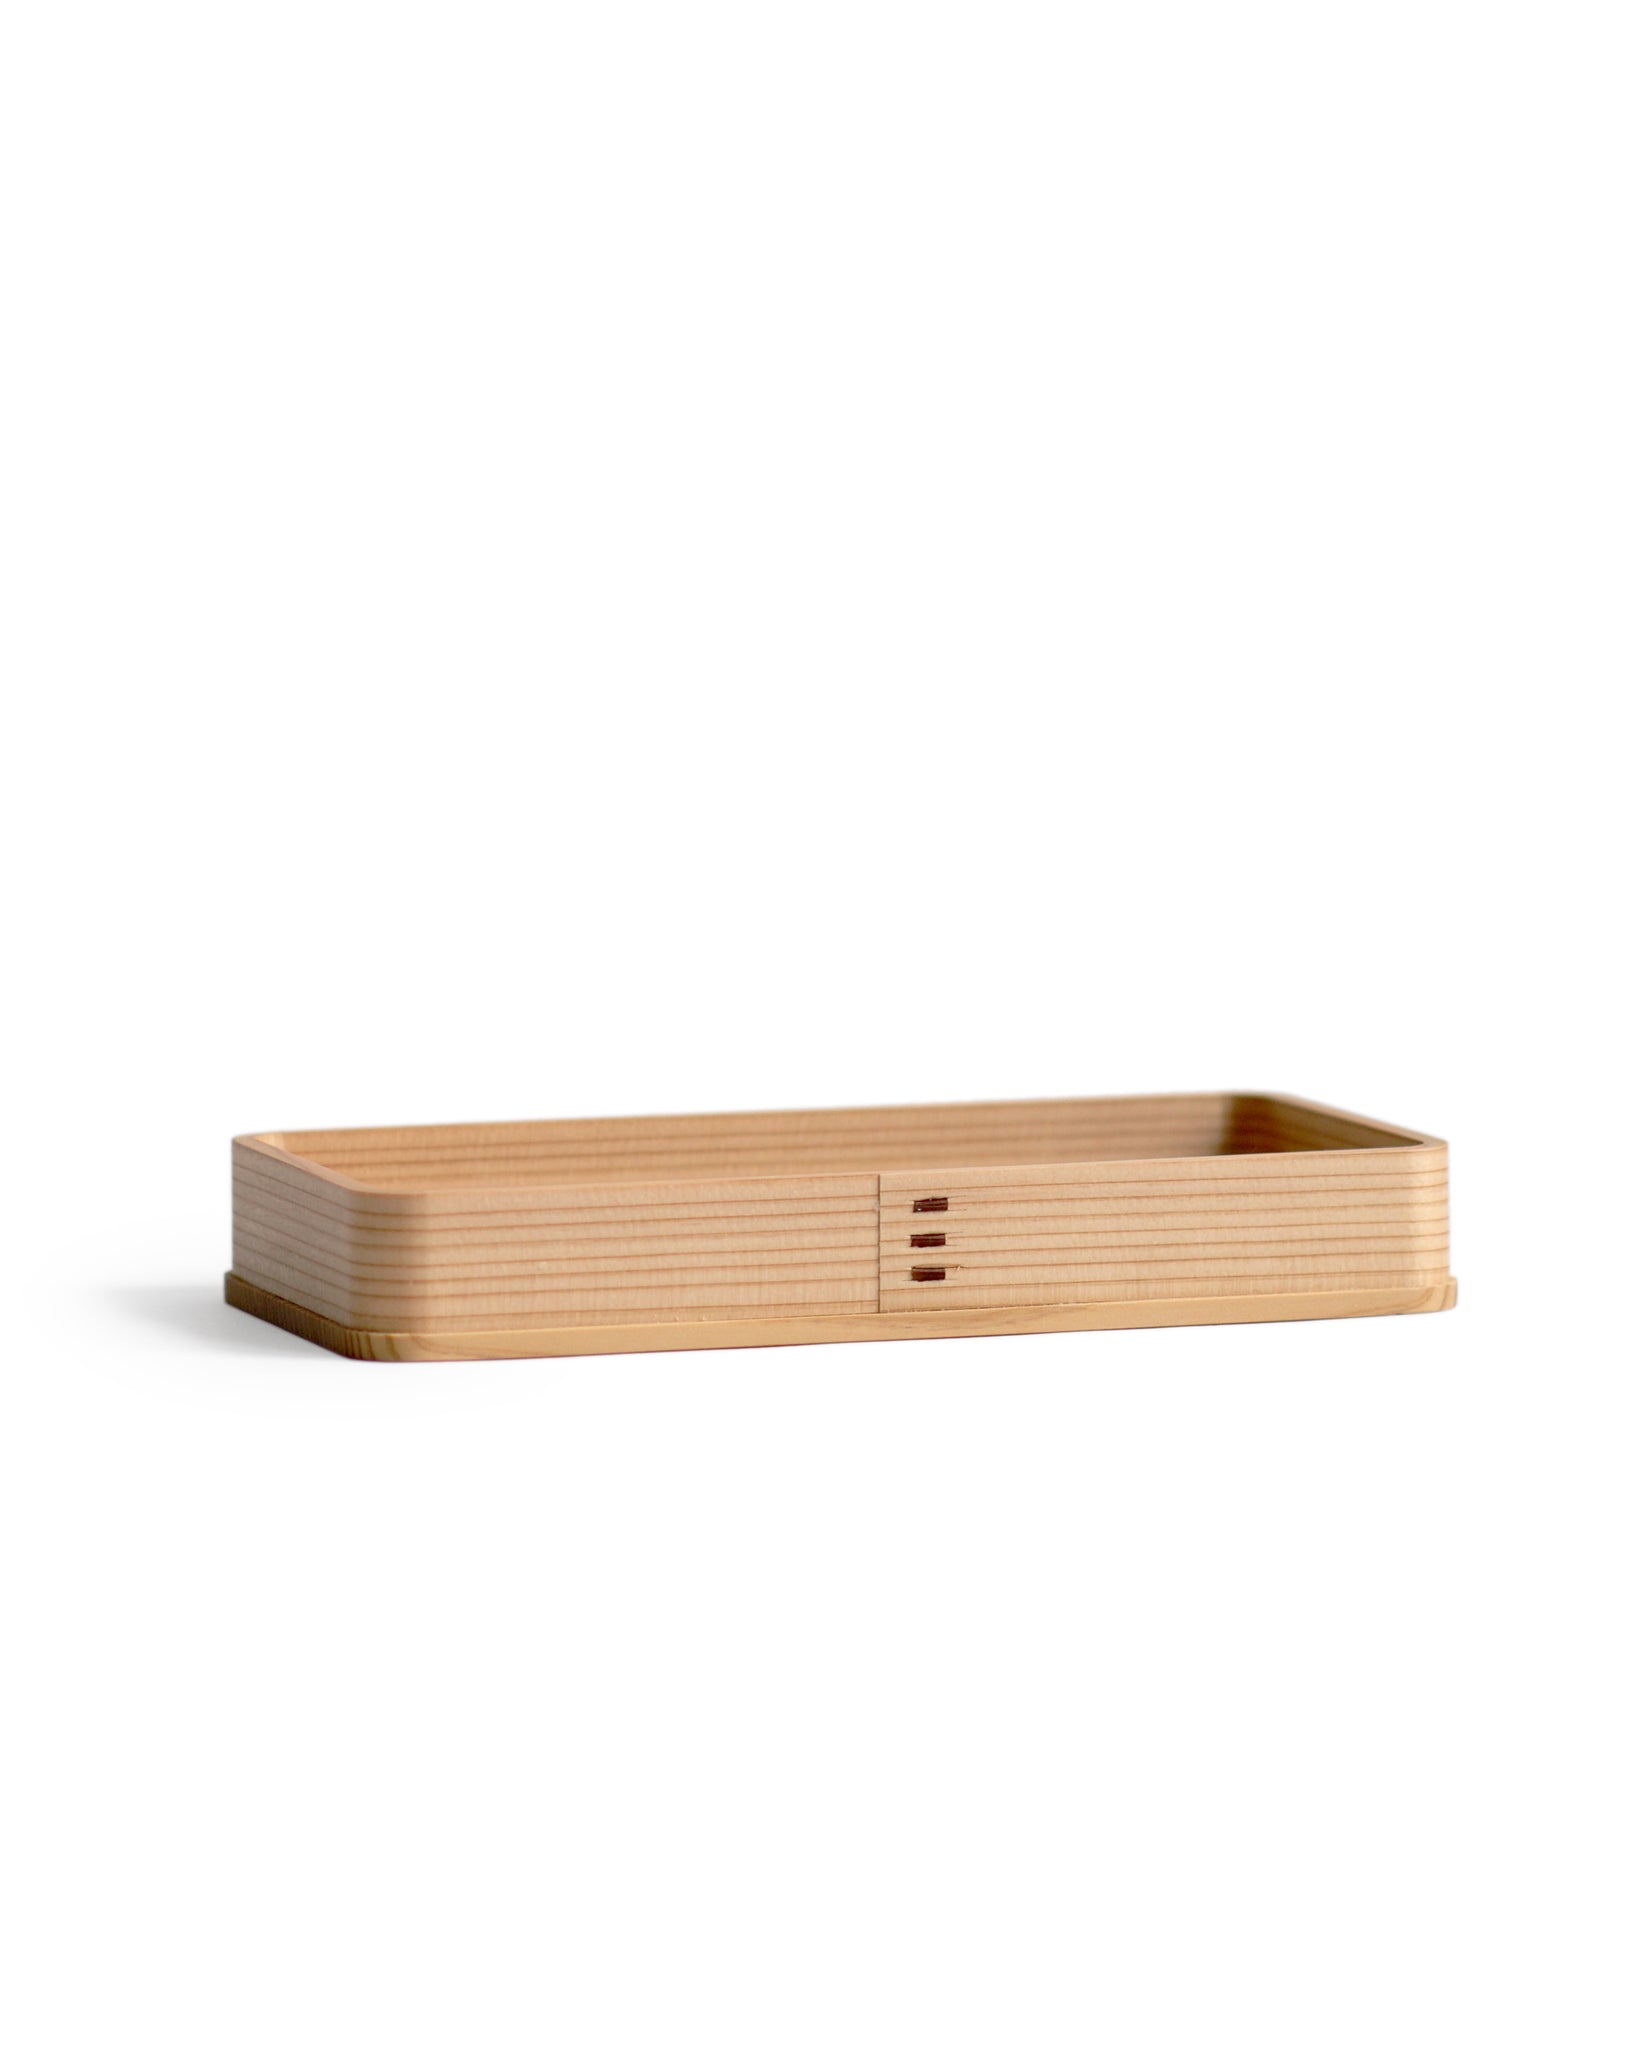 Silhouetted image of the rectangle cedar tray against white background at an angle.